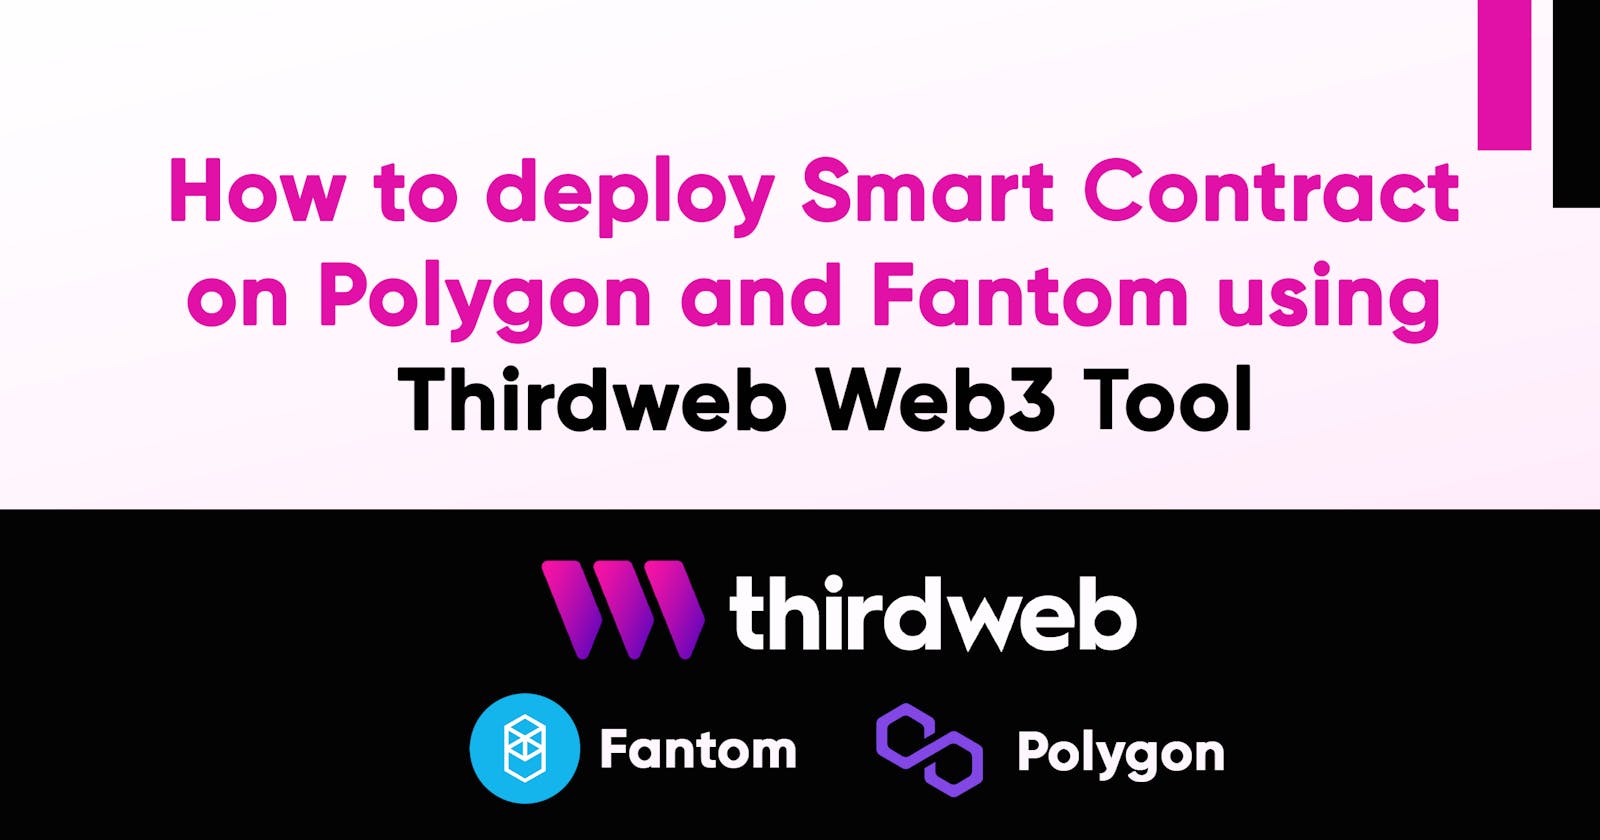 How to deploy Smart Contract on Polygon and Fantom using Thirdweb Web3 Tool